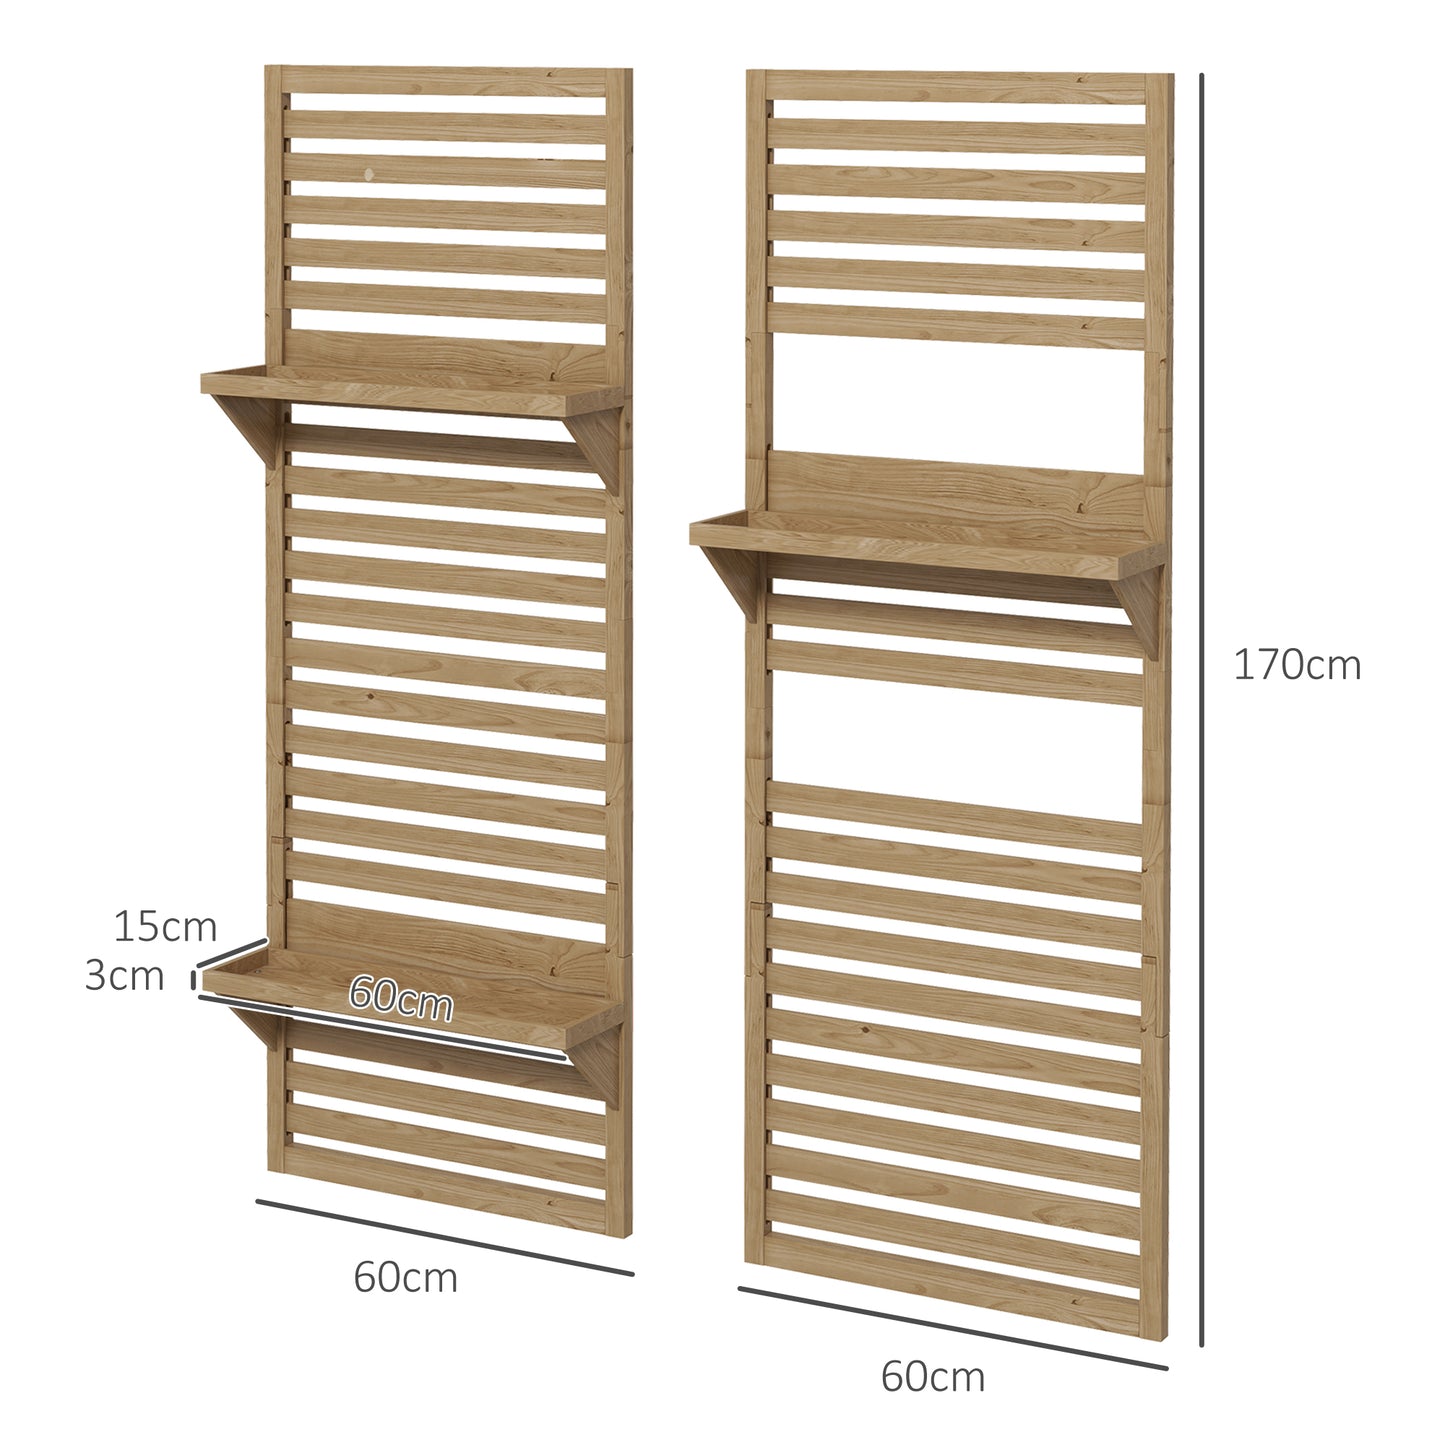 Outsunny Wall Mounted Plant Stands Set of 2, Fir Wood Flower Stand w-Shelves and Slatted Trellis for Patio, Balcony, Porch